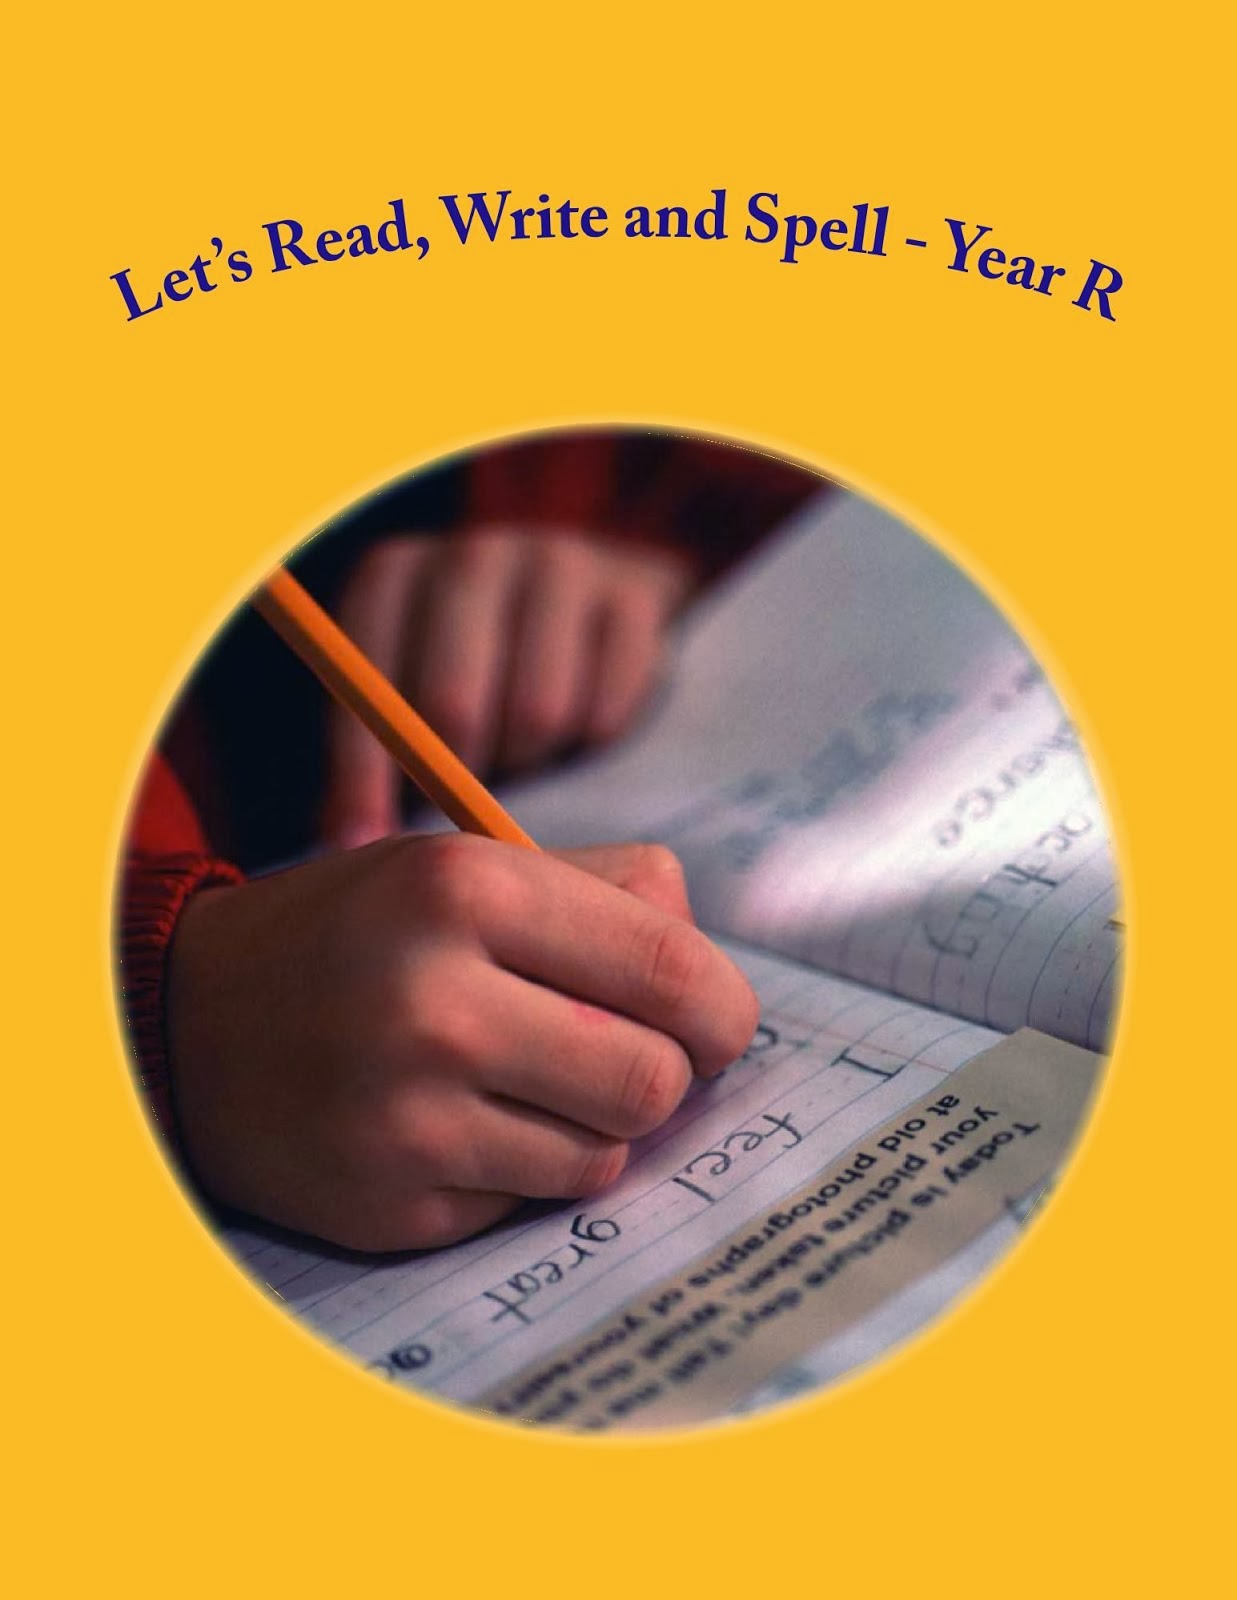 Let's Read, Write and Spell